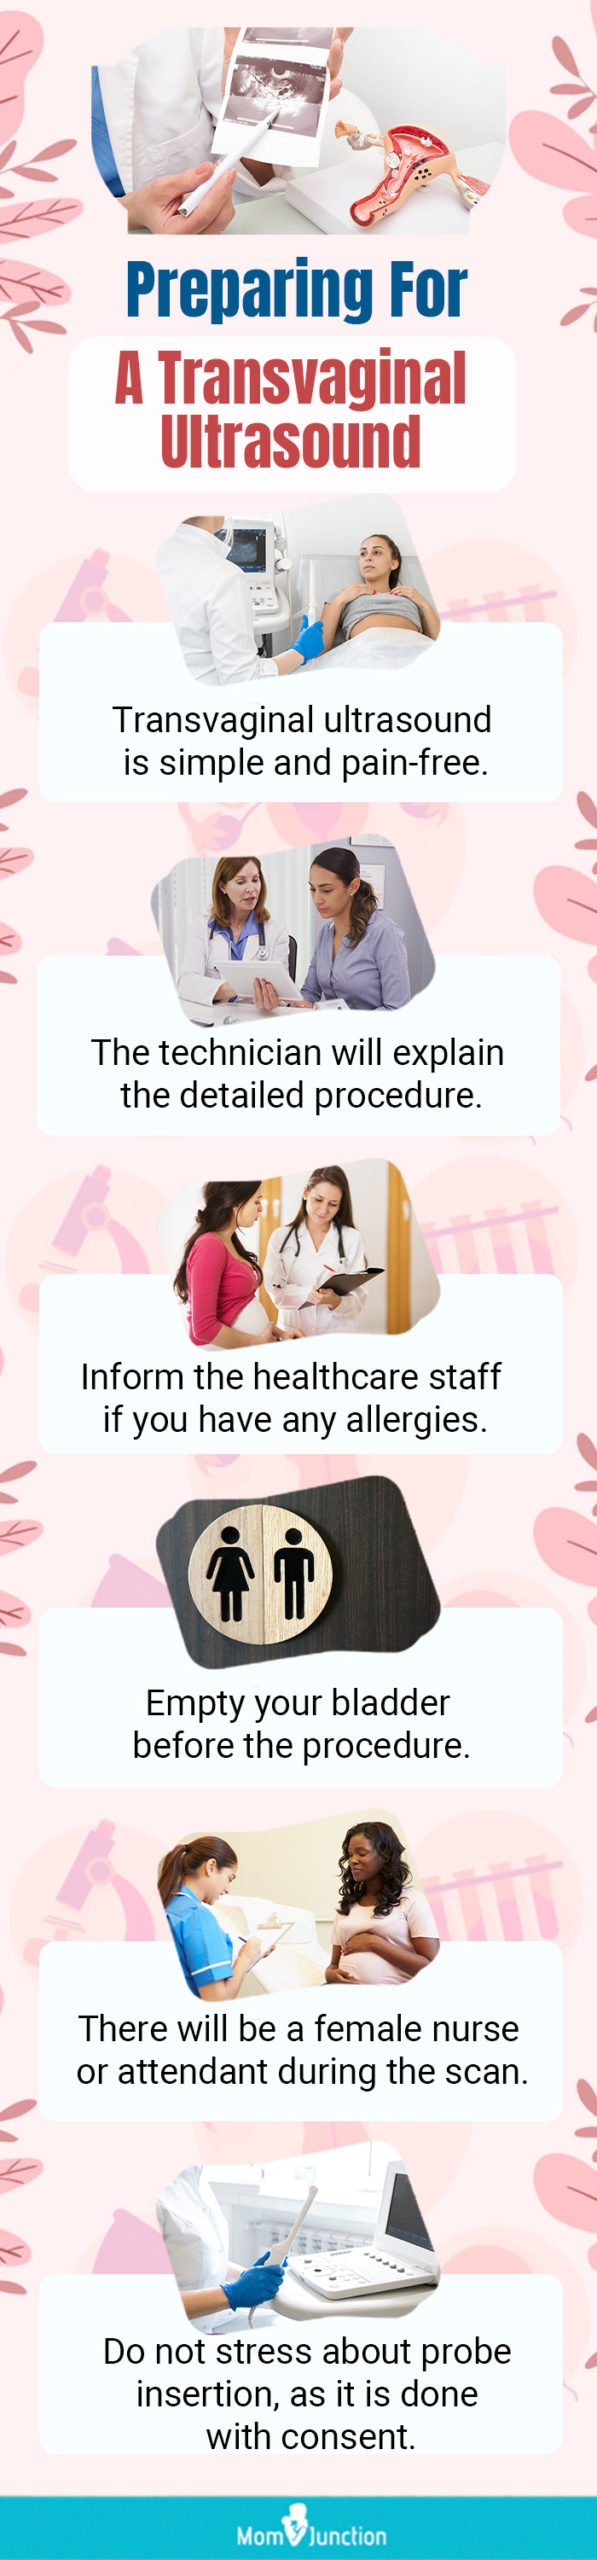 preparing for a transvaginal ultrasound (infographic)